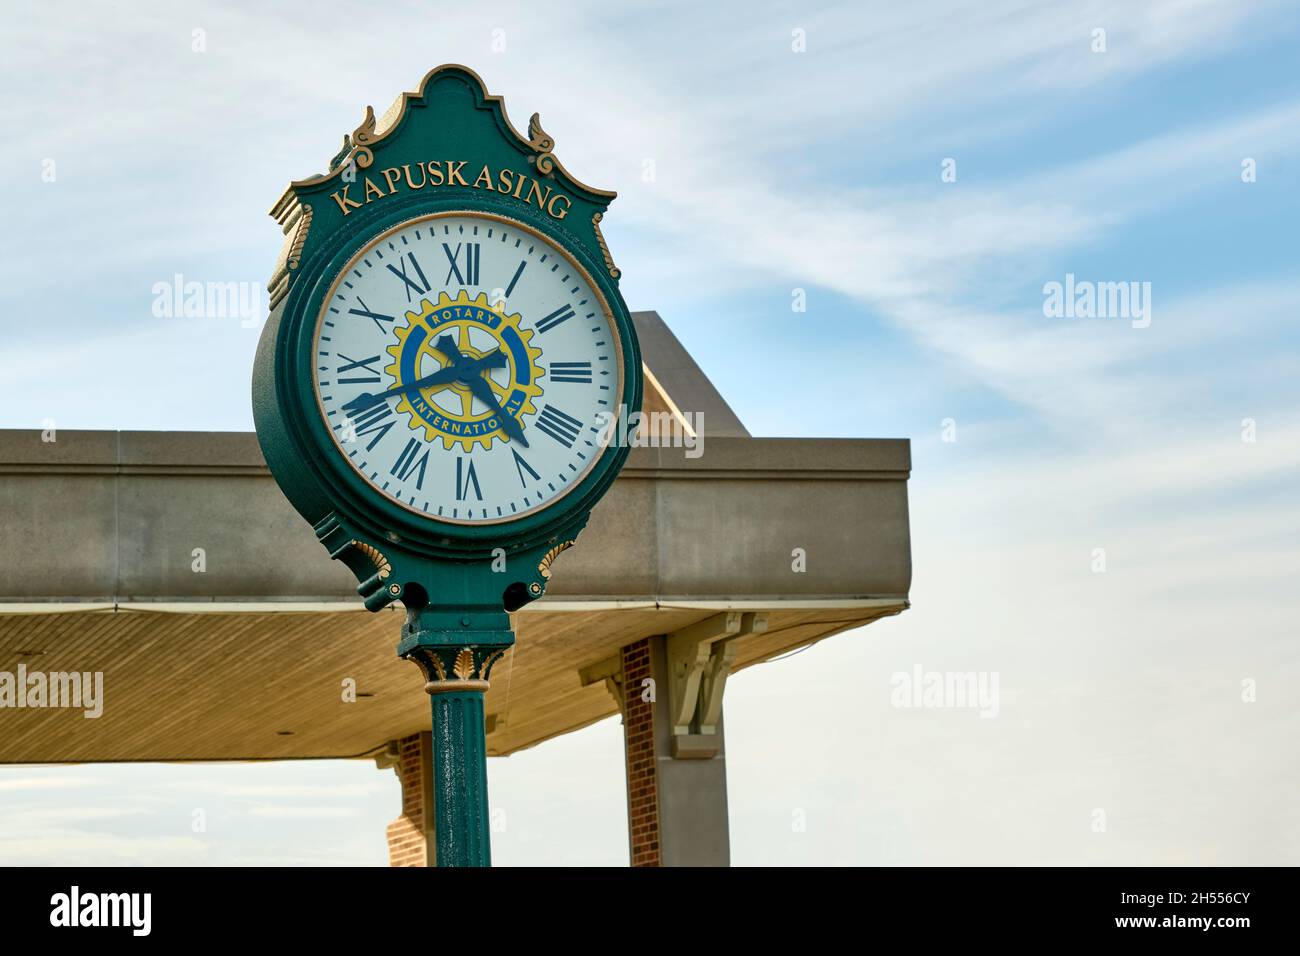 Clock donated by Rotary International located at the Welcome Centre in Kapuskasing Ontario. Stock Photo